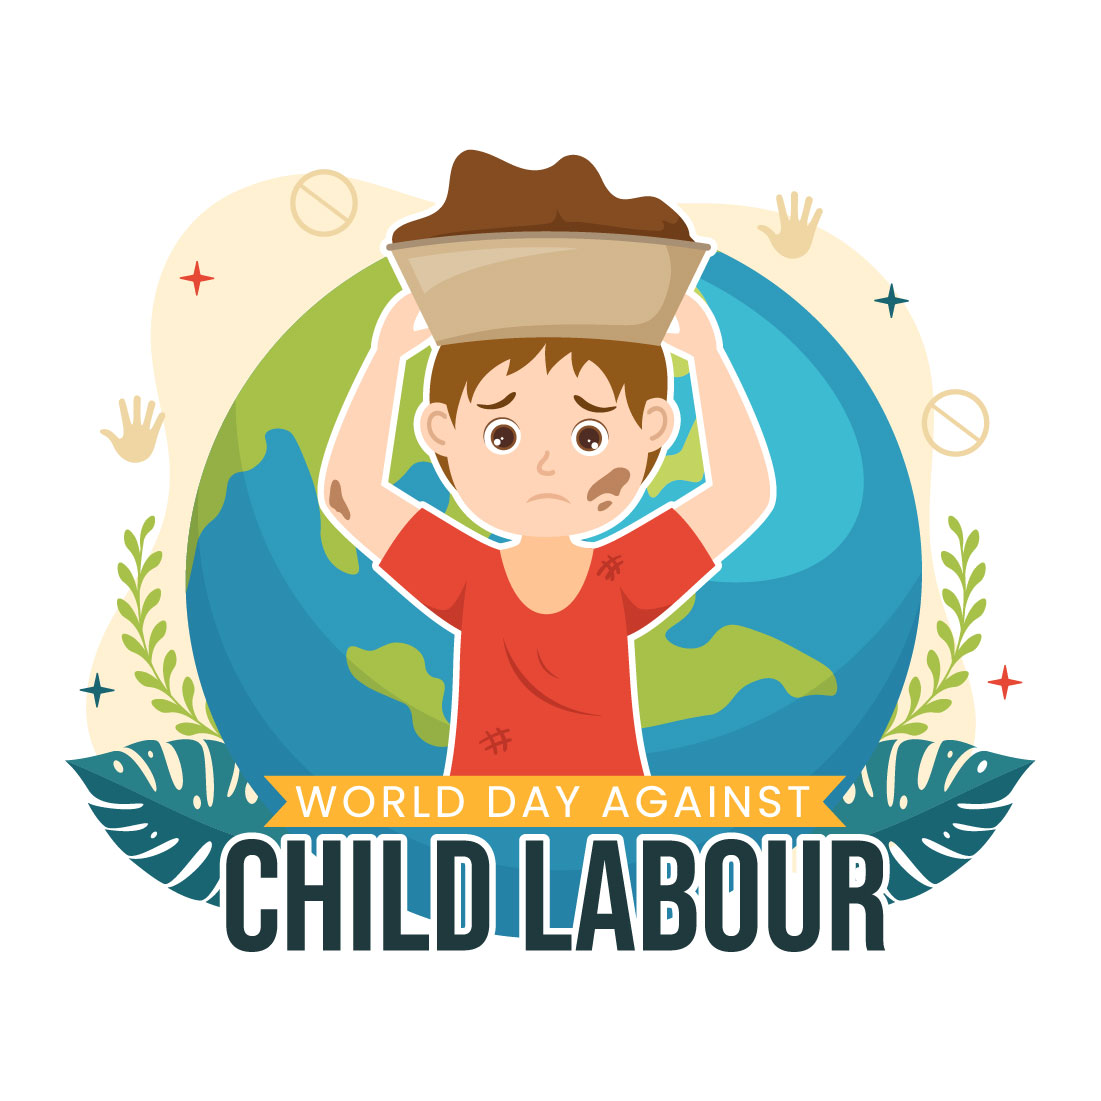 This year's theme of the World Day Against Child Labour is set as  